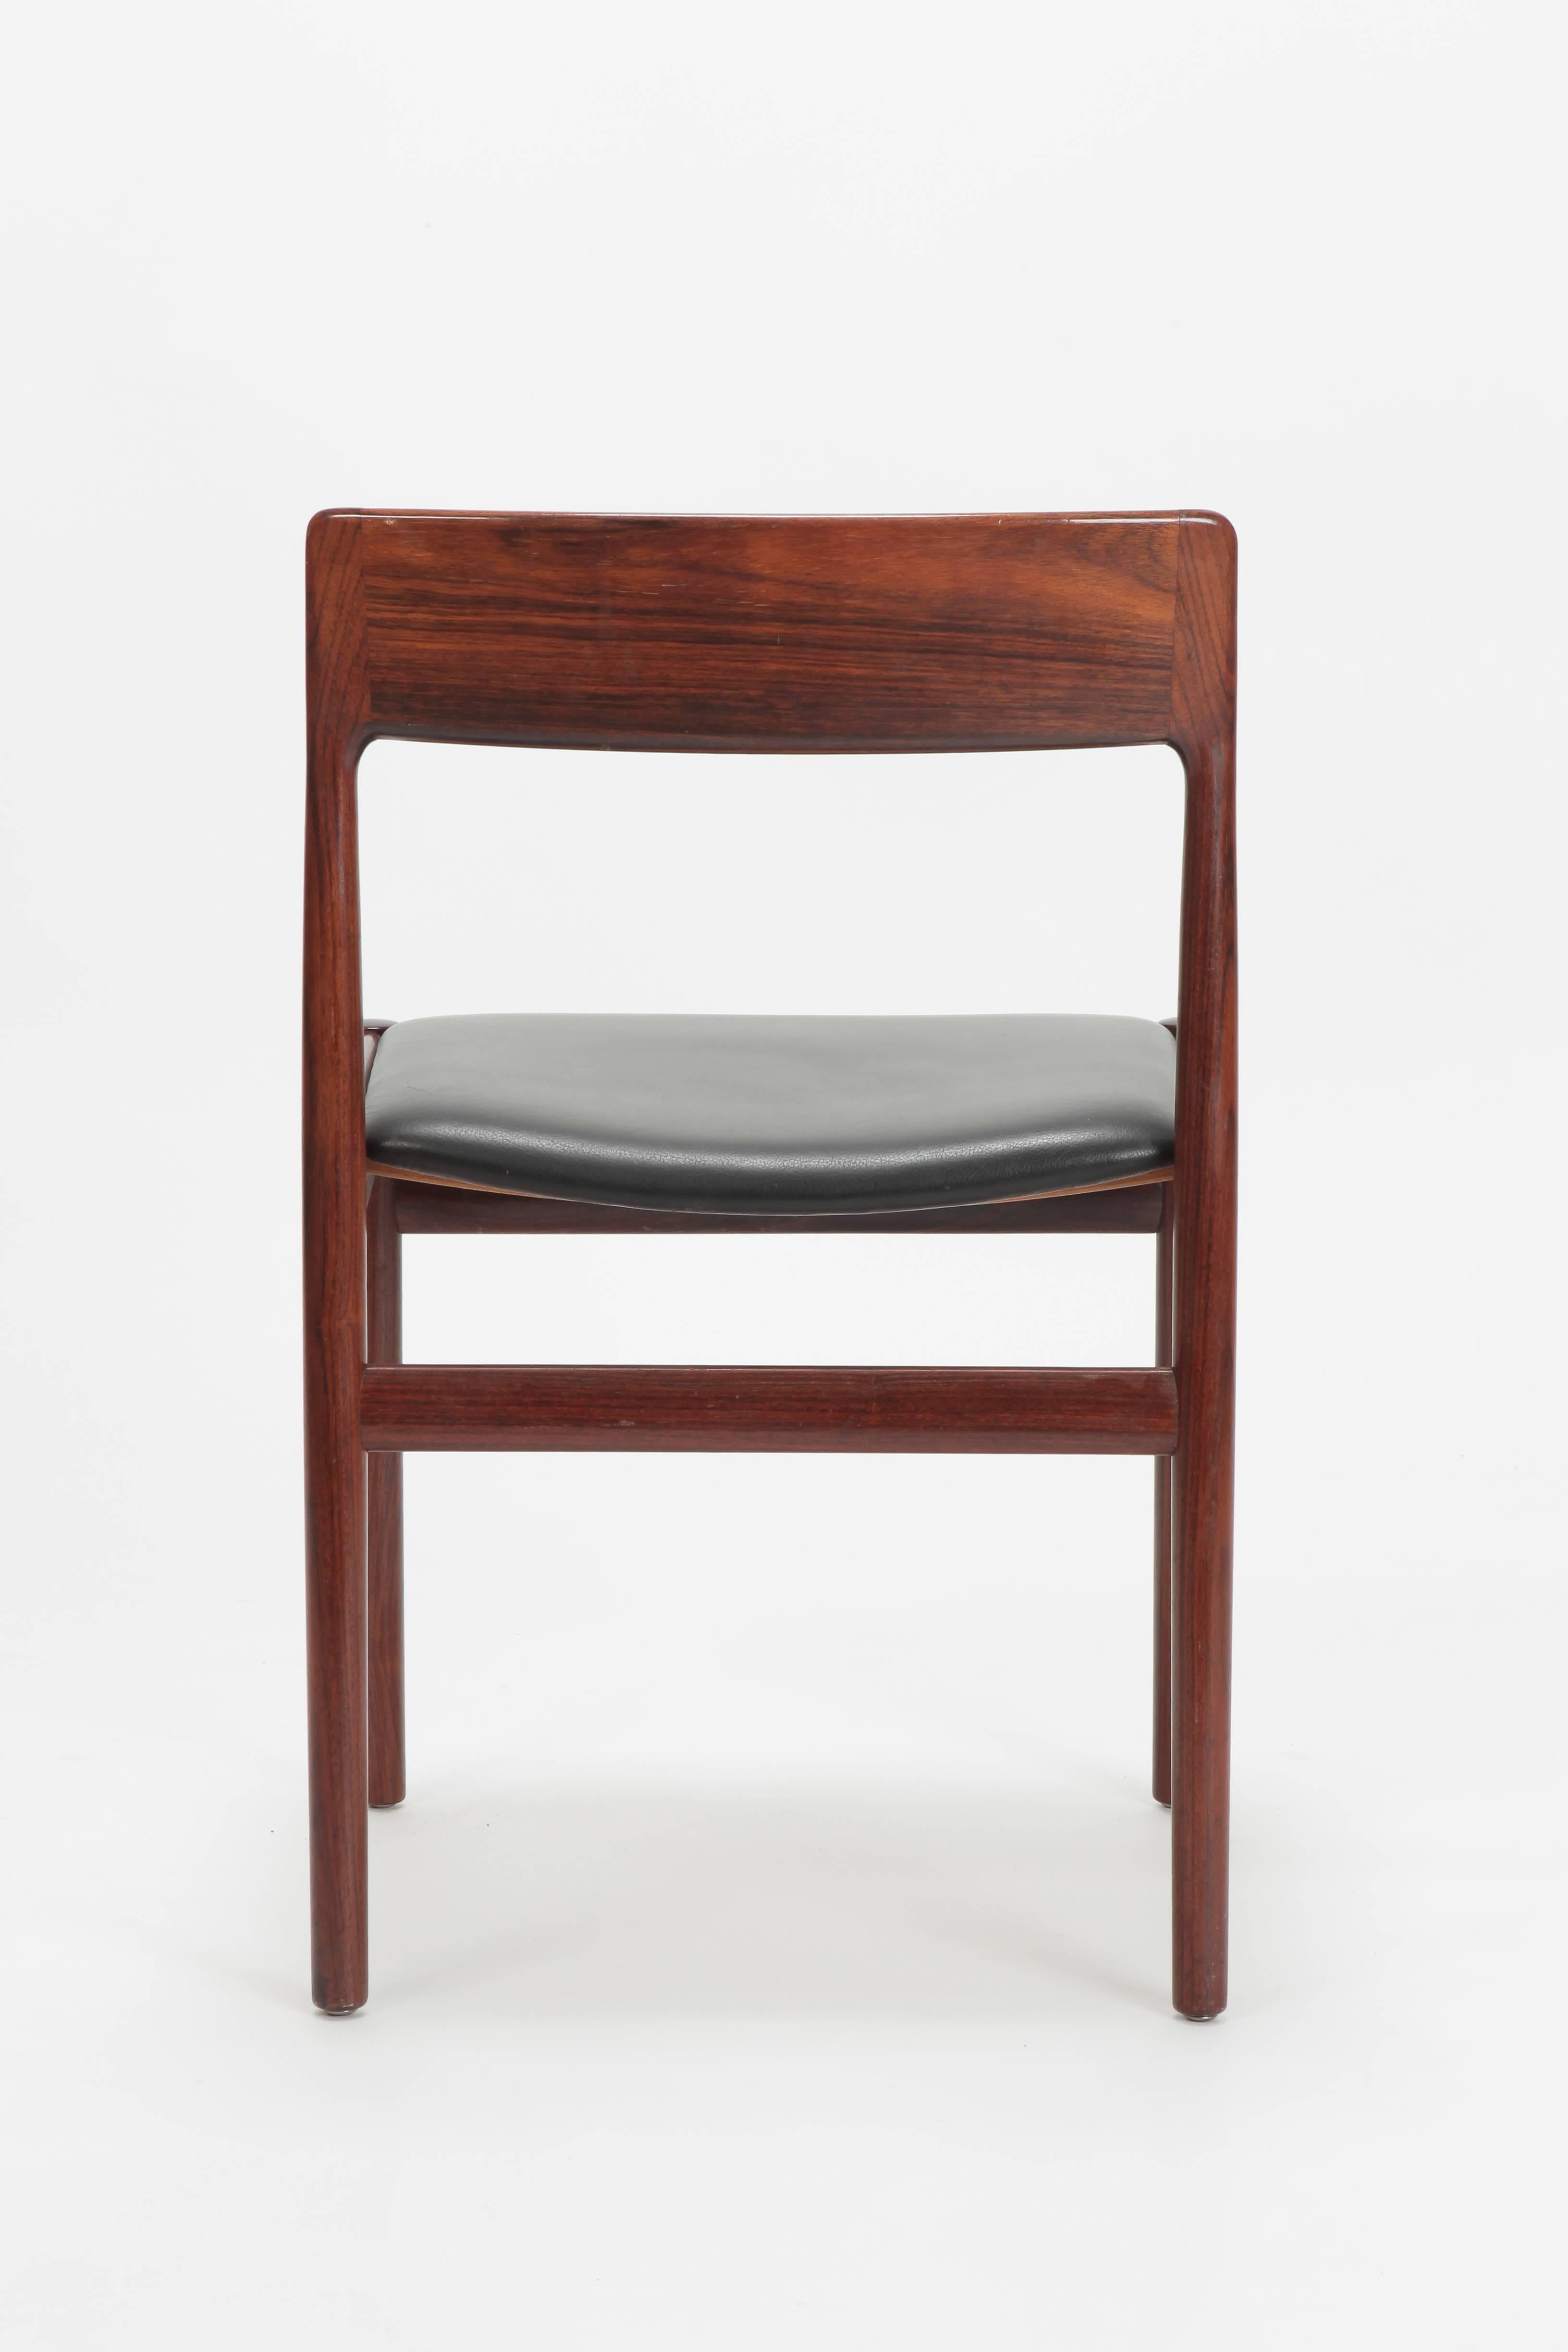 5 Johannes Norgaard Rosewood Chairs, 1960s 3